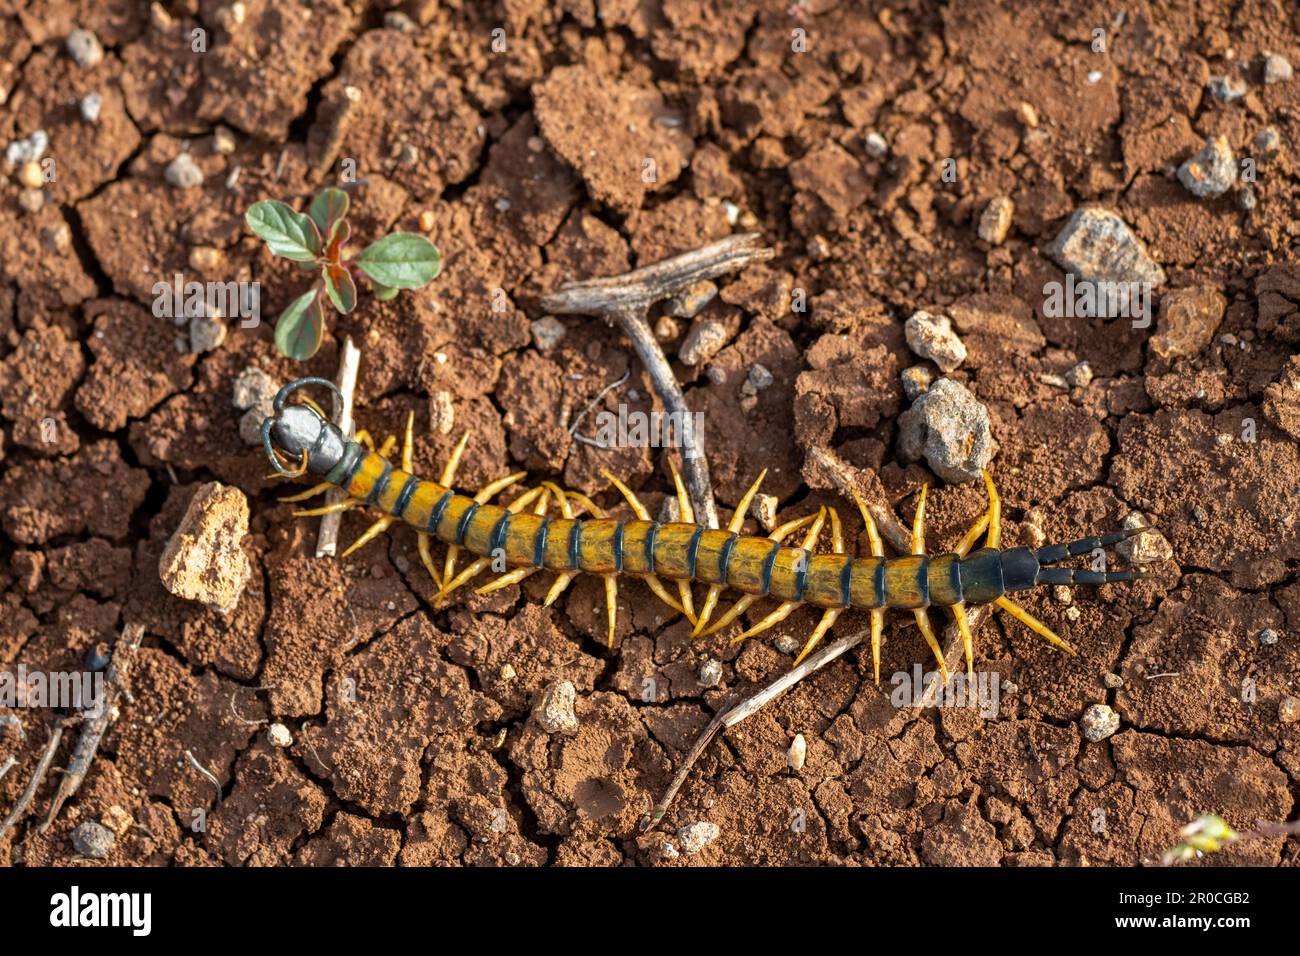 Centipede (Scolopendra) a venomous night predator. Photographed in Israel, Golan Heights, in April Centipedes are predatory arthropods belonging to th Stock Photo